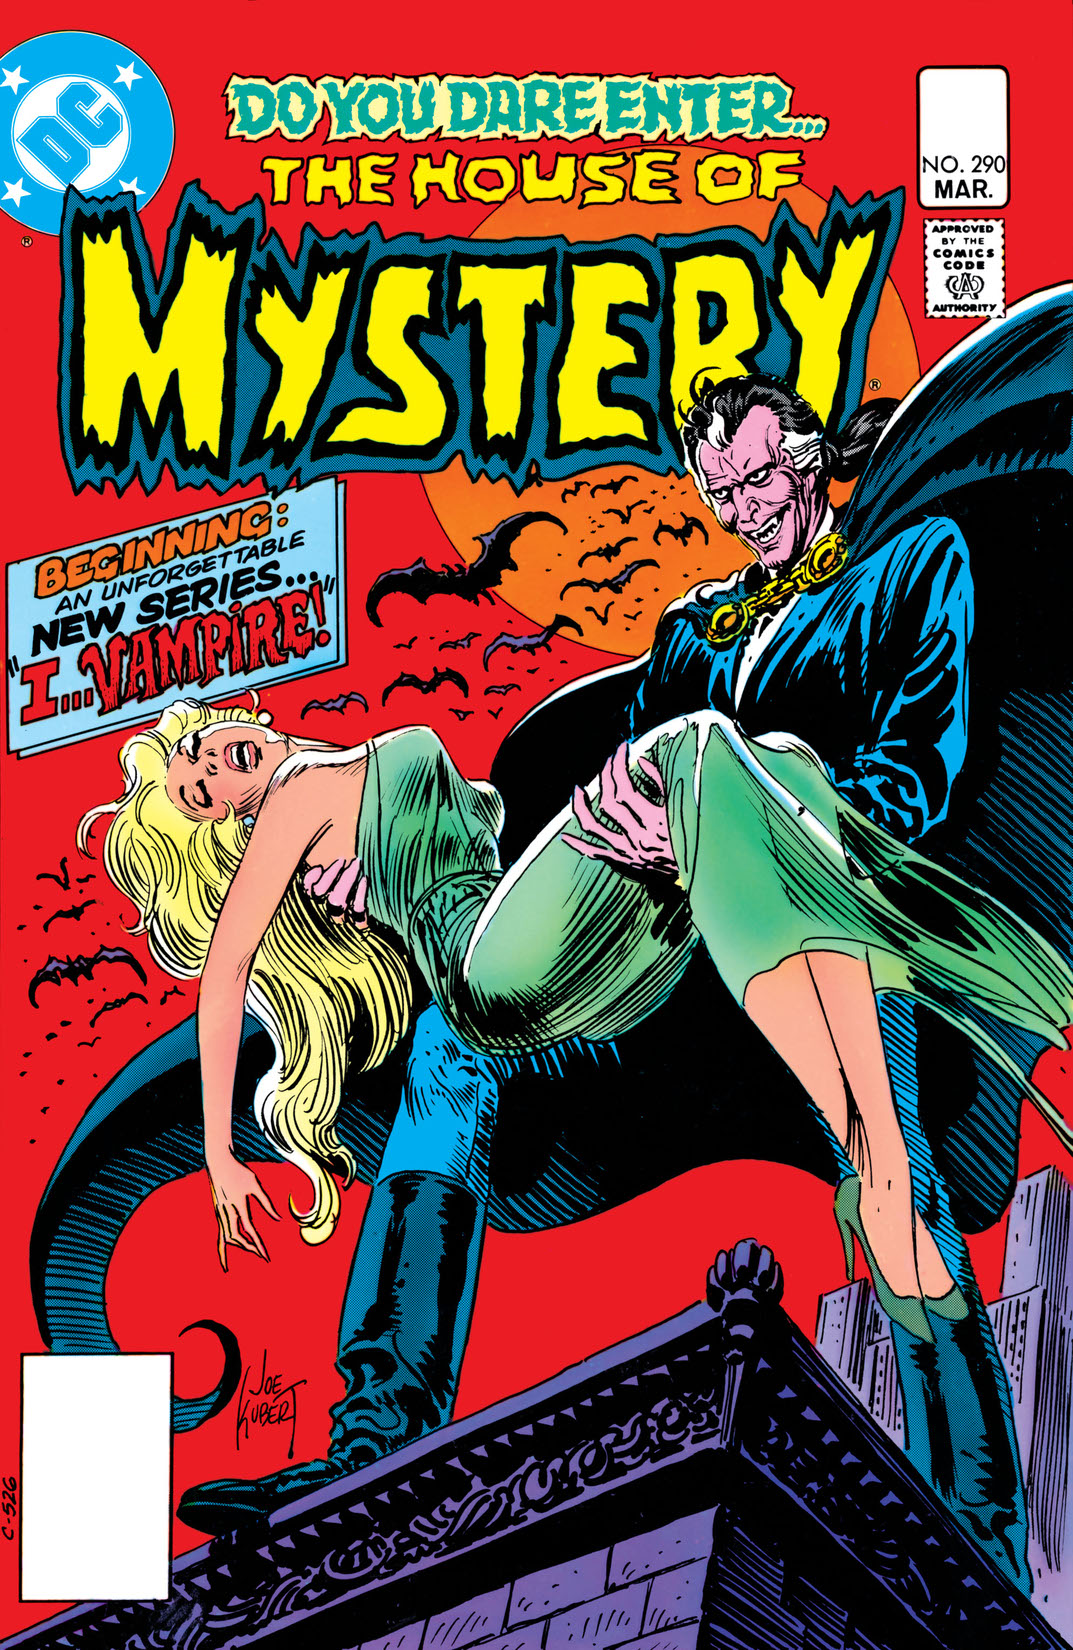 House of Mystery (1951-) #290 preview images